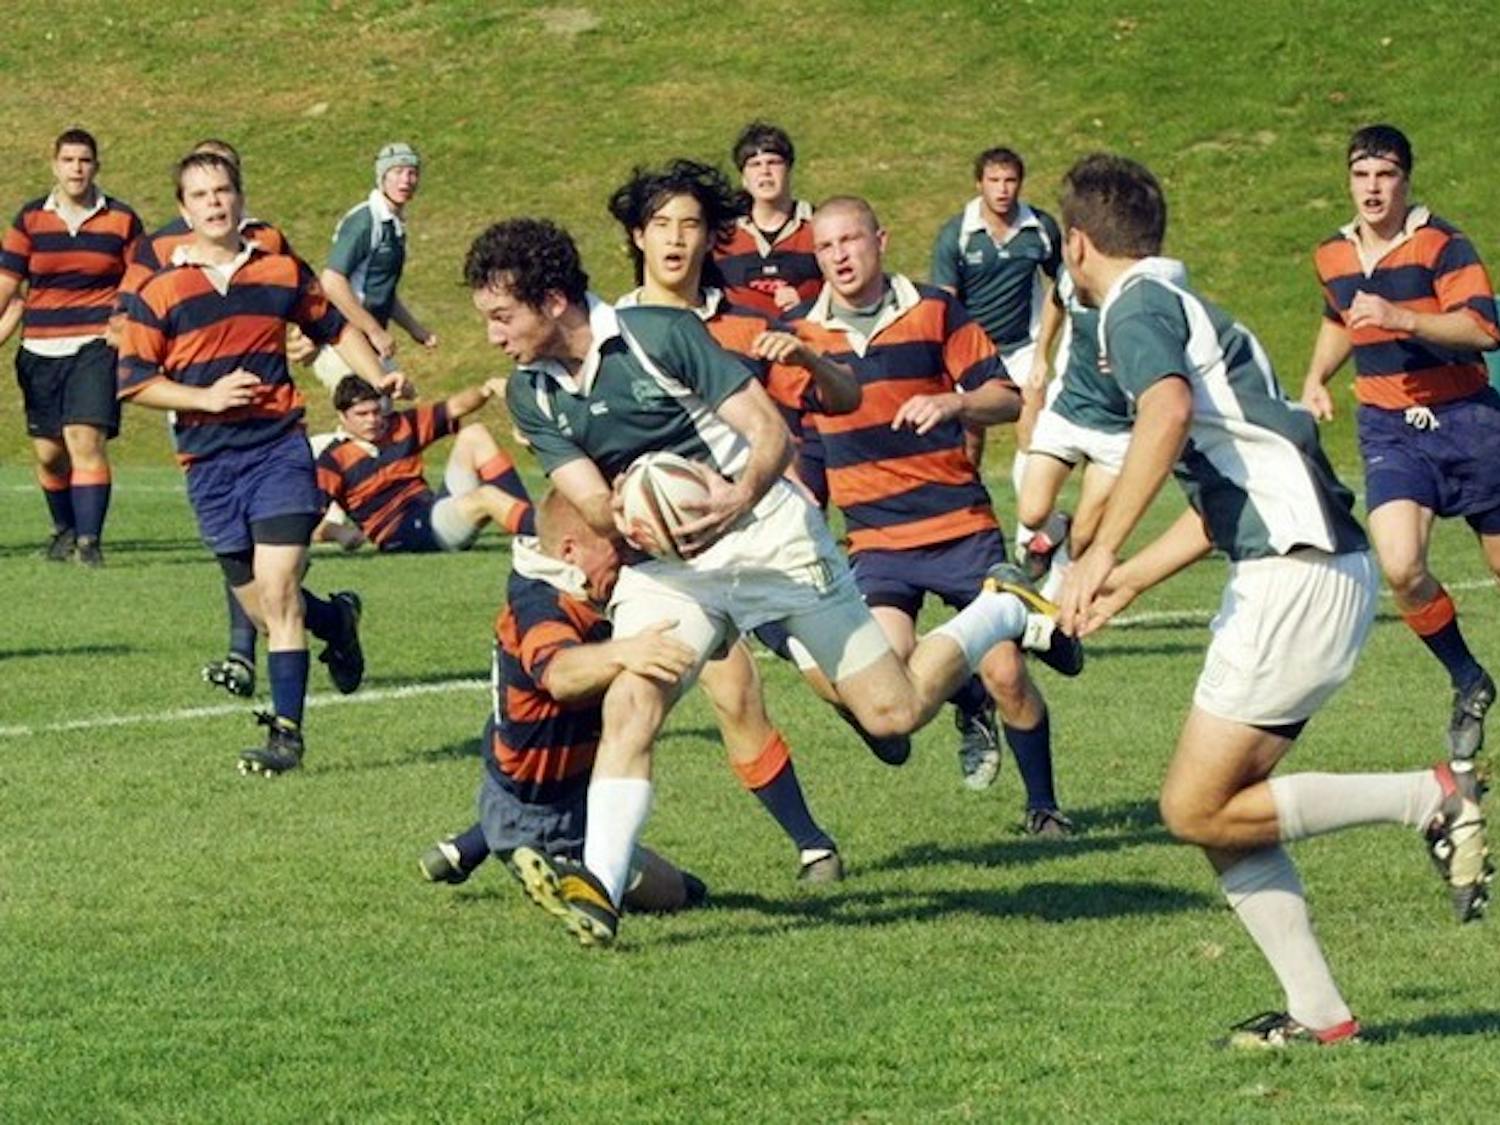 The Dartmouth Rugby Football Club dropped a heartbreaker to Harvard this past weekend. While able to create numerous scoring opportunities for itself, the squad just could not seem to convert its chances.